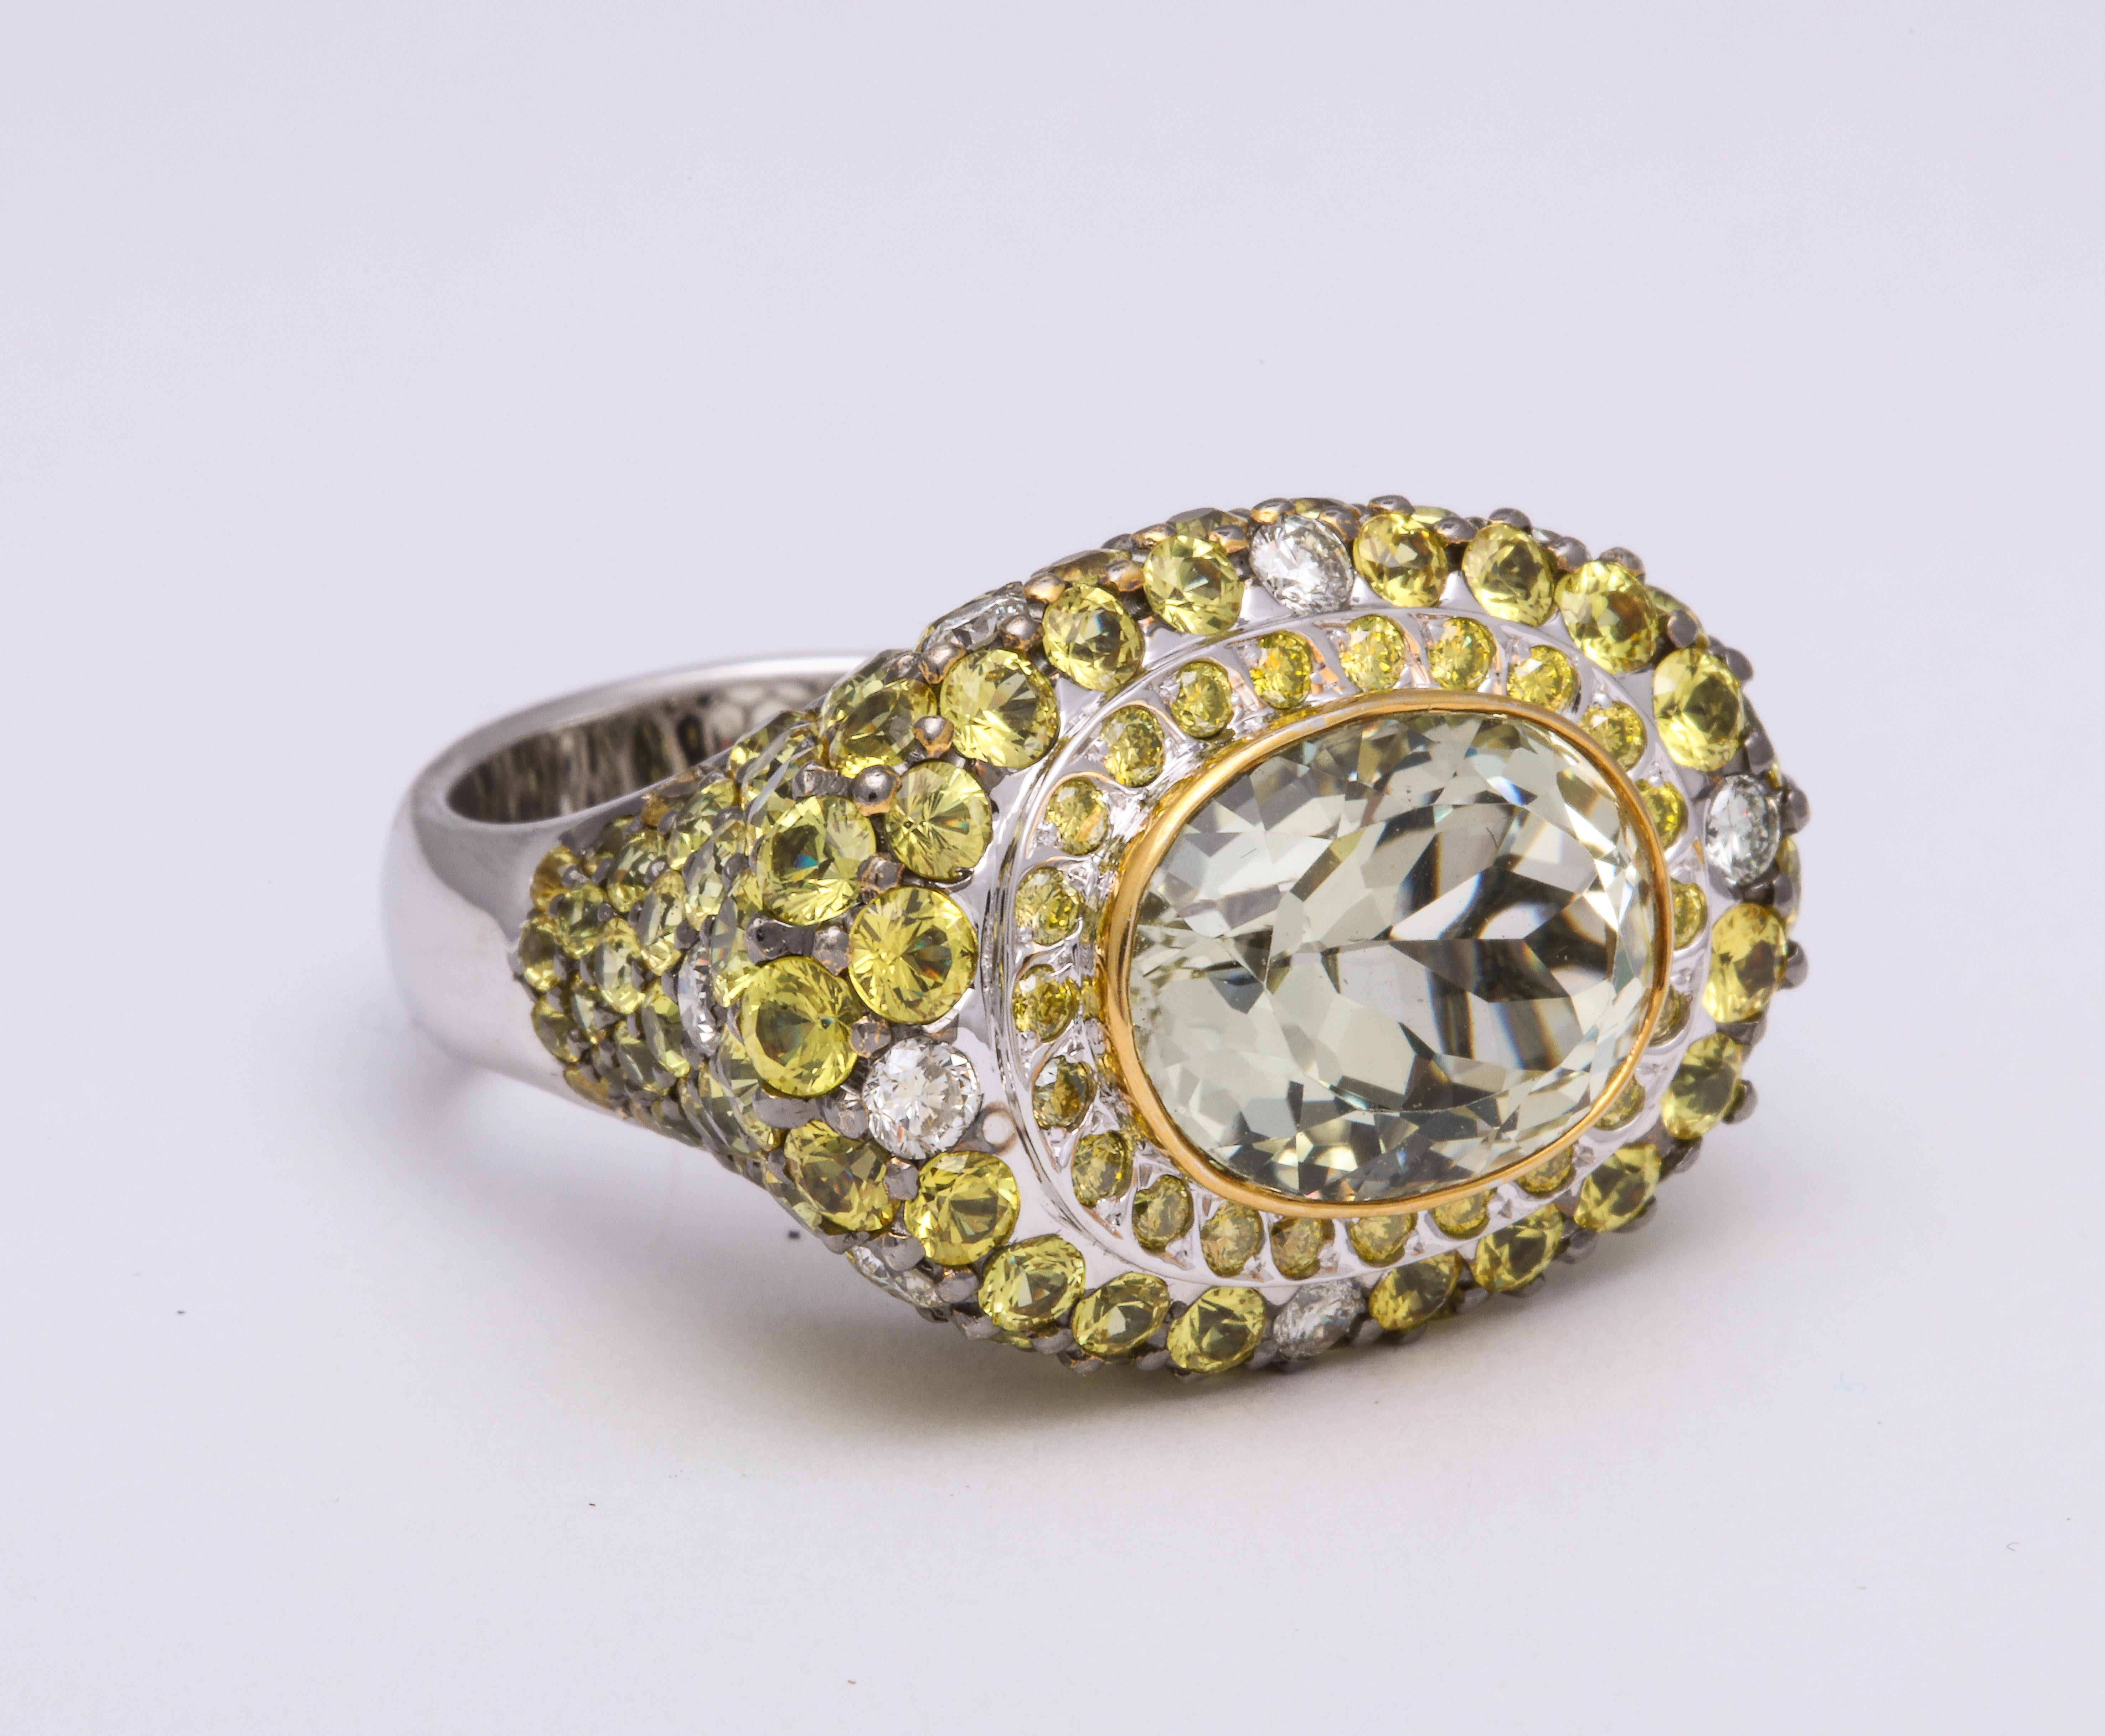 Contemporary and BOLD high and flat top 18 Karat white gold cocktail ring mounted with east:west orientation faceted oval yellow sapphire, bezel-set: 7.71 carats, decorated with round diamond-cut yellow sapphires: 5.79 carats, and staggered